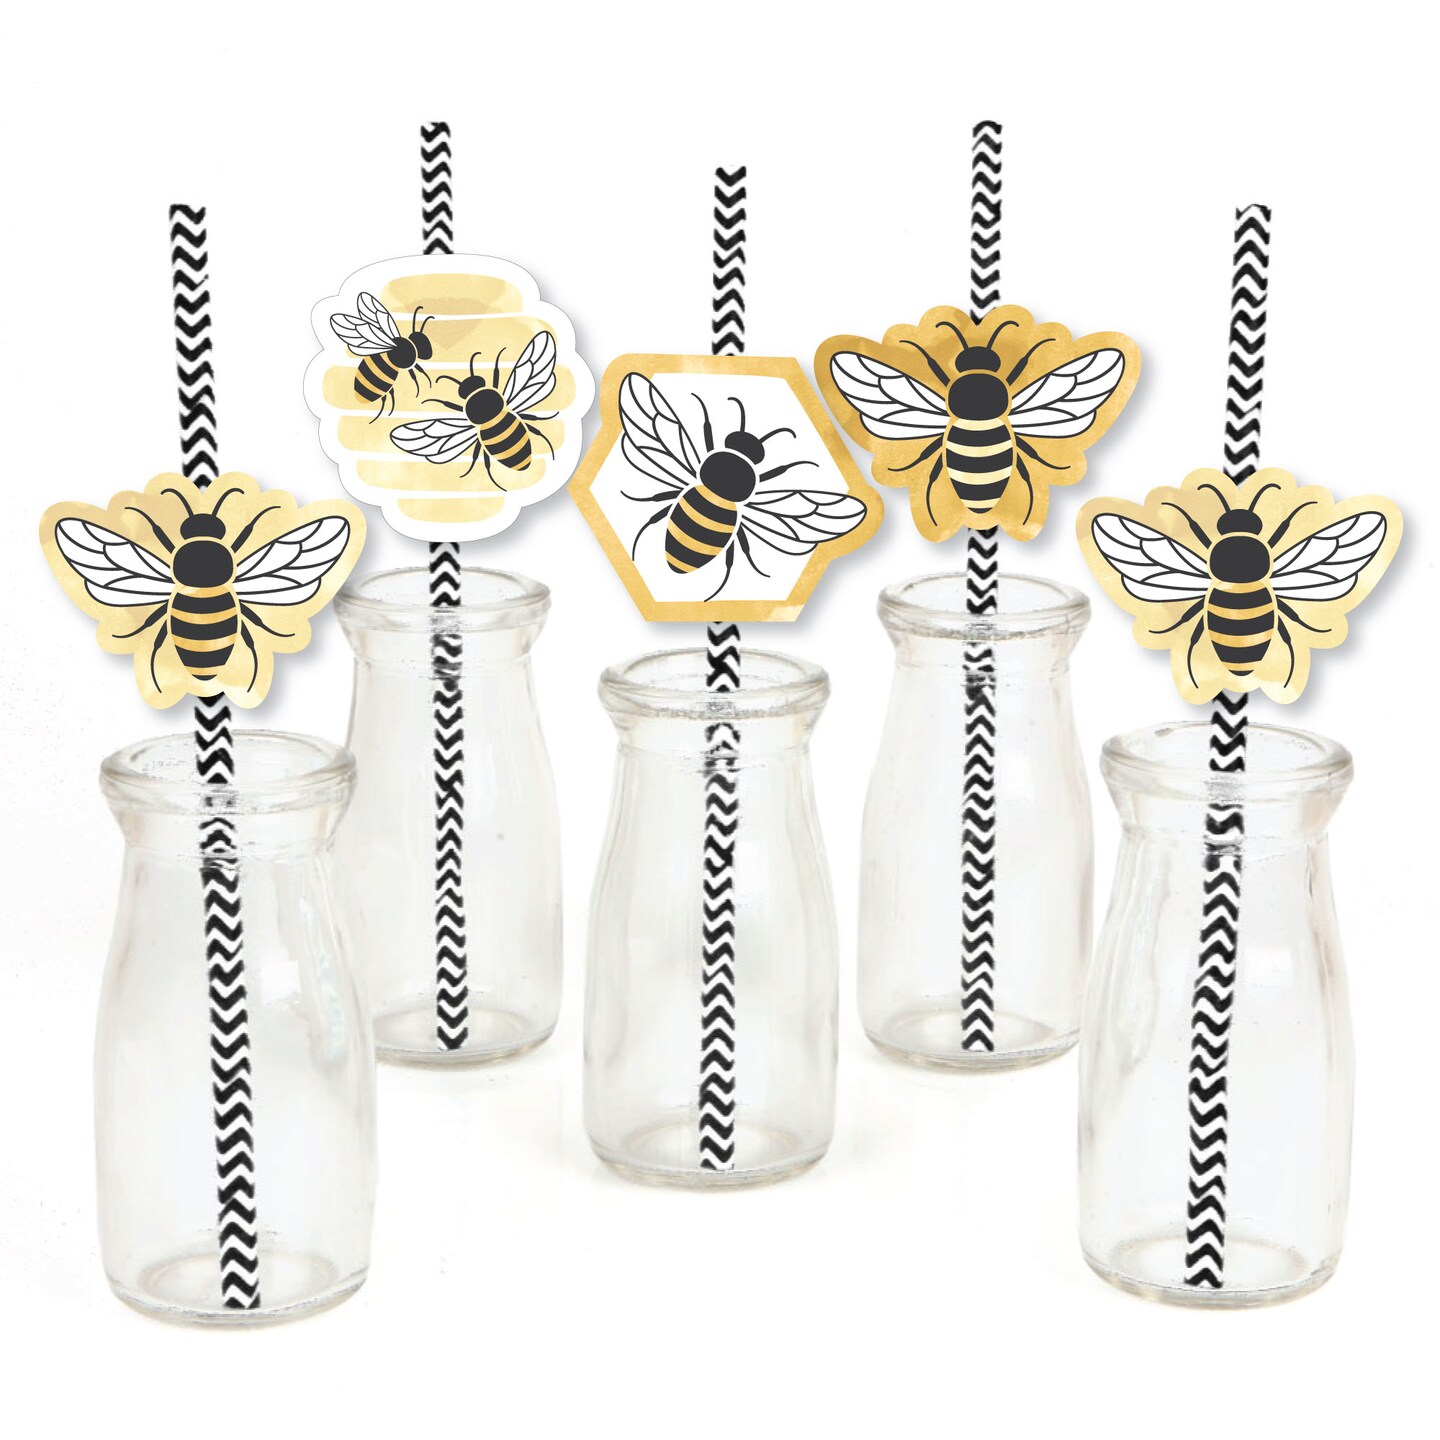 Big Dot of Happiness Little Bumblebee - Paper Straw Decor - Bee Baby Shower or Birthday Party Striped Decorative Straws - Set of 24